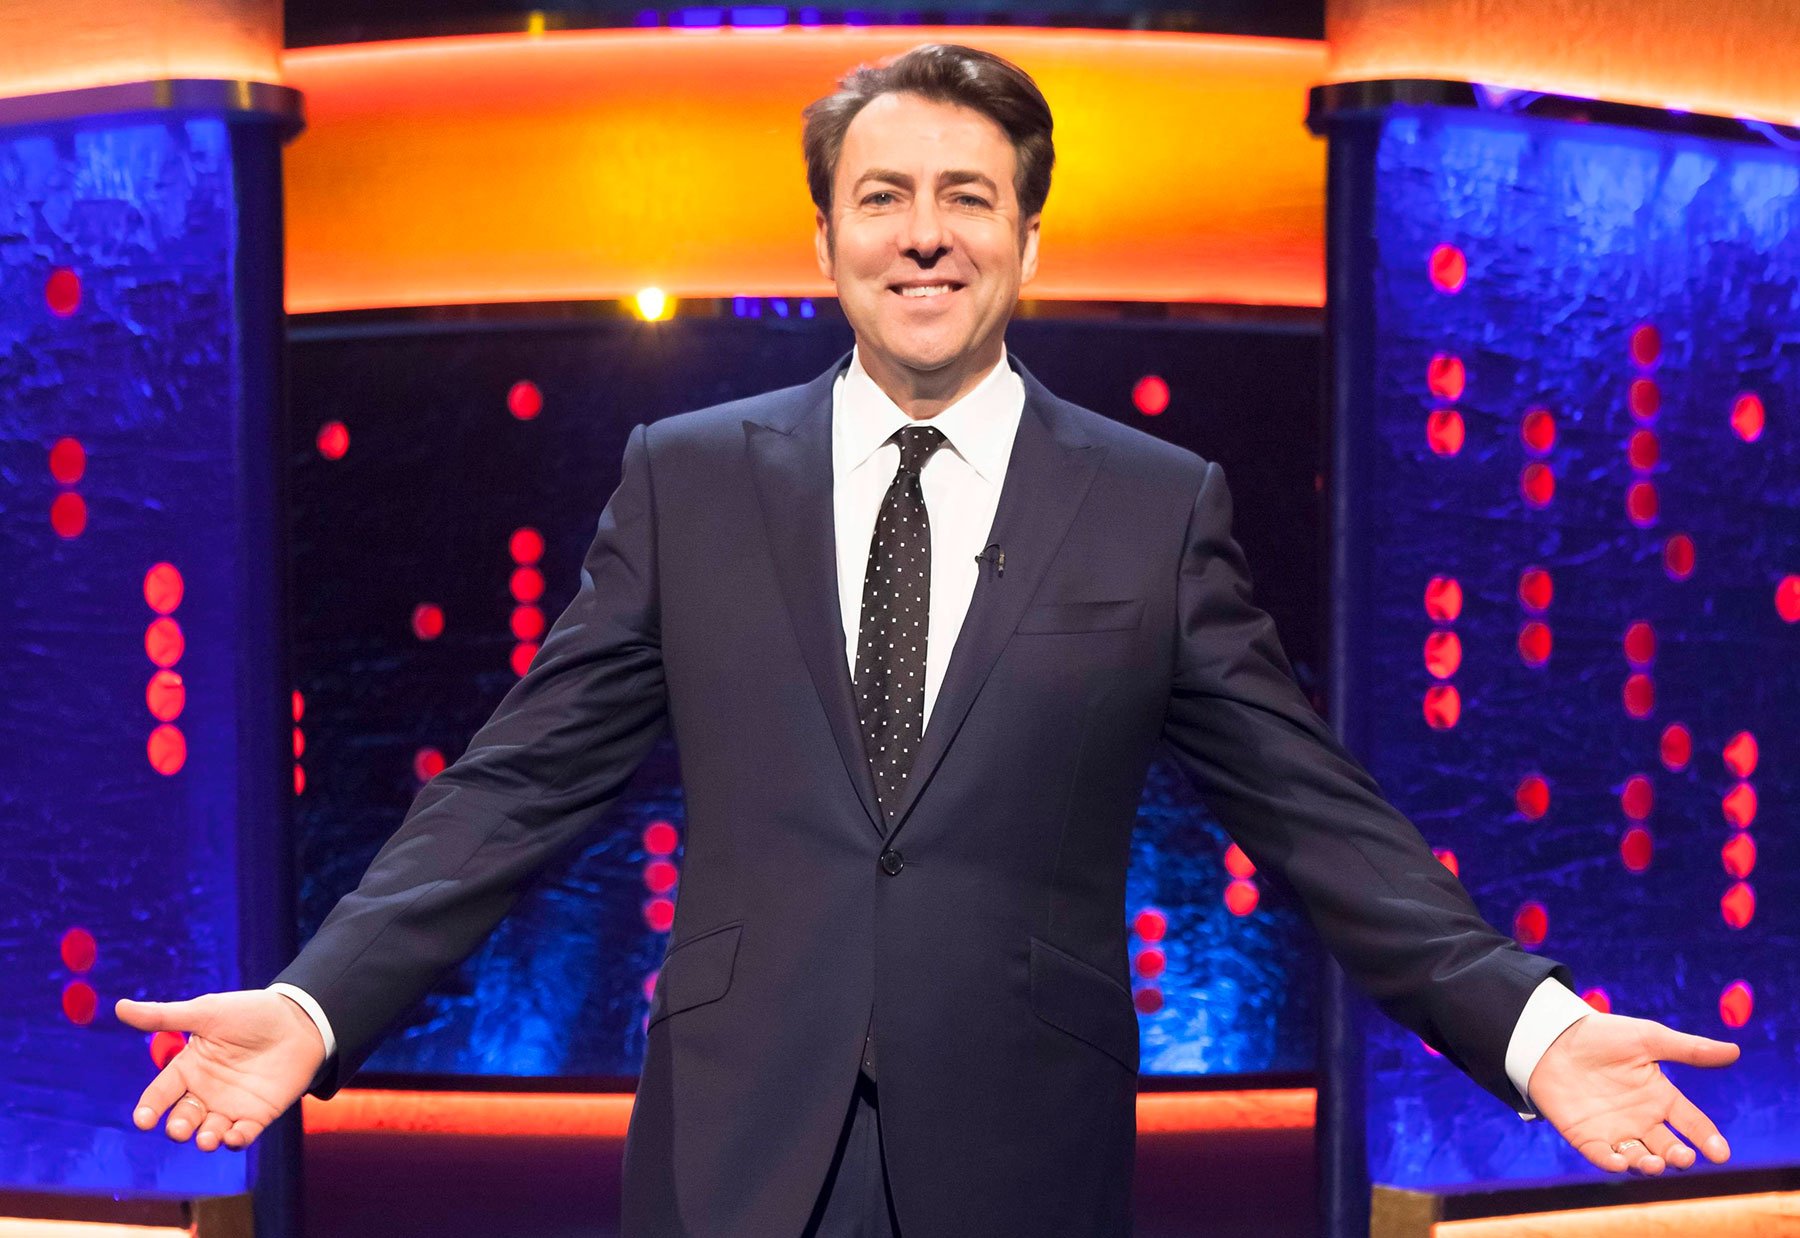 What Is Jonathan Ross' Net Worth? And His Most Controversial Moments